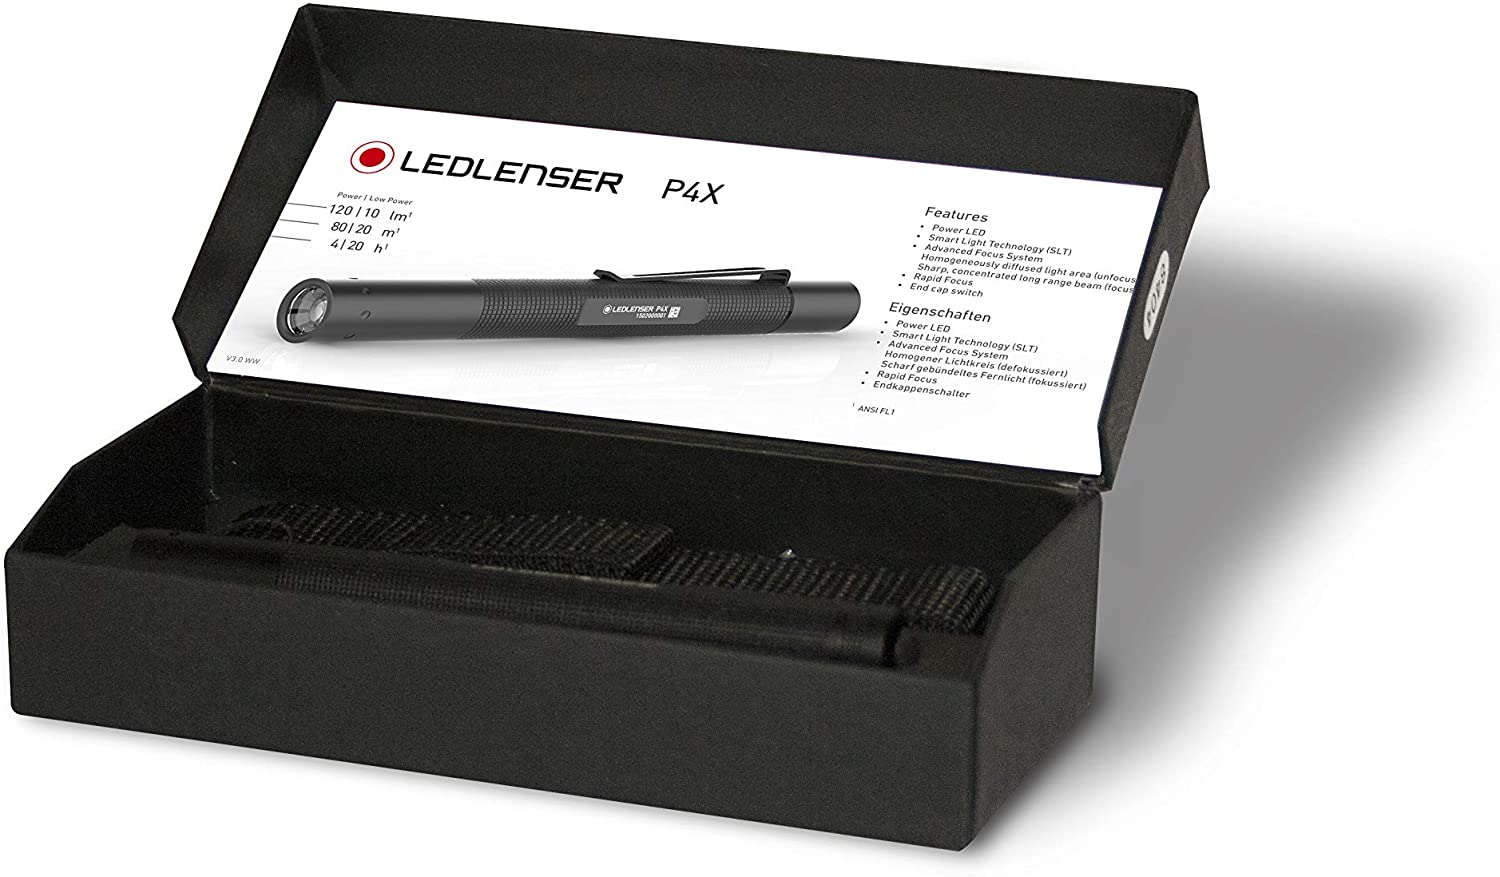 led. nser p4x torch box with powerful light output